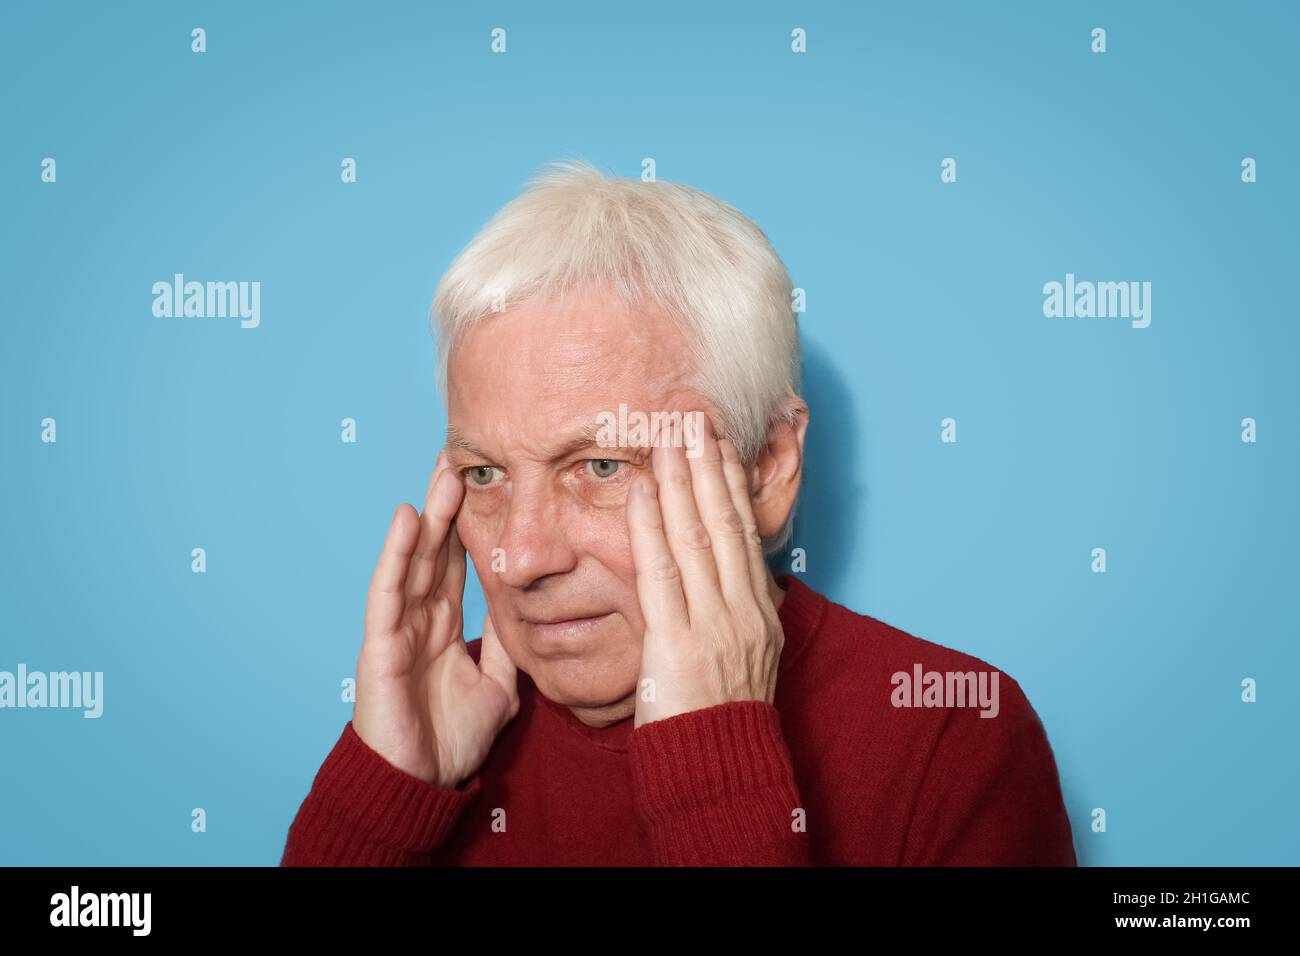 White haired man having headache isolated over blue background Stock Photo